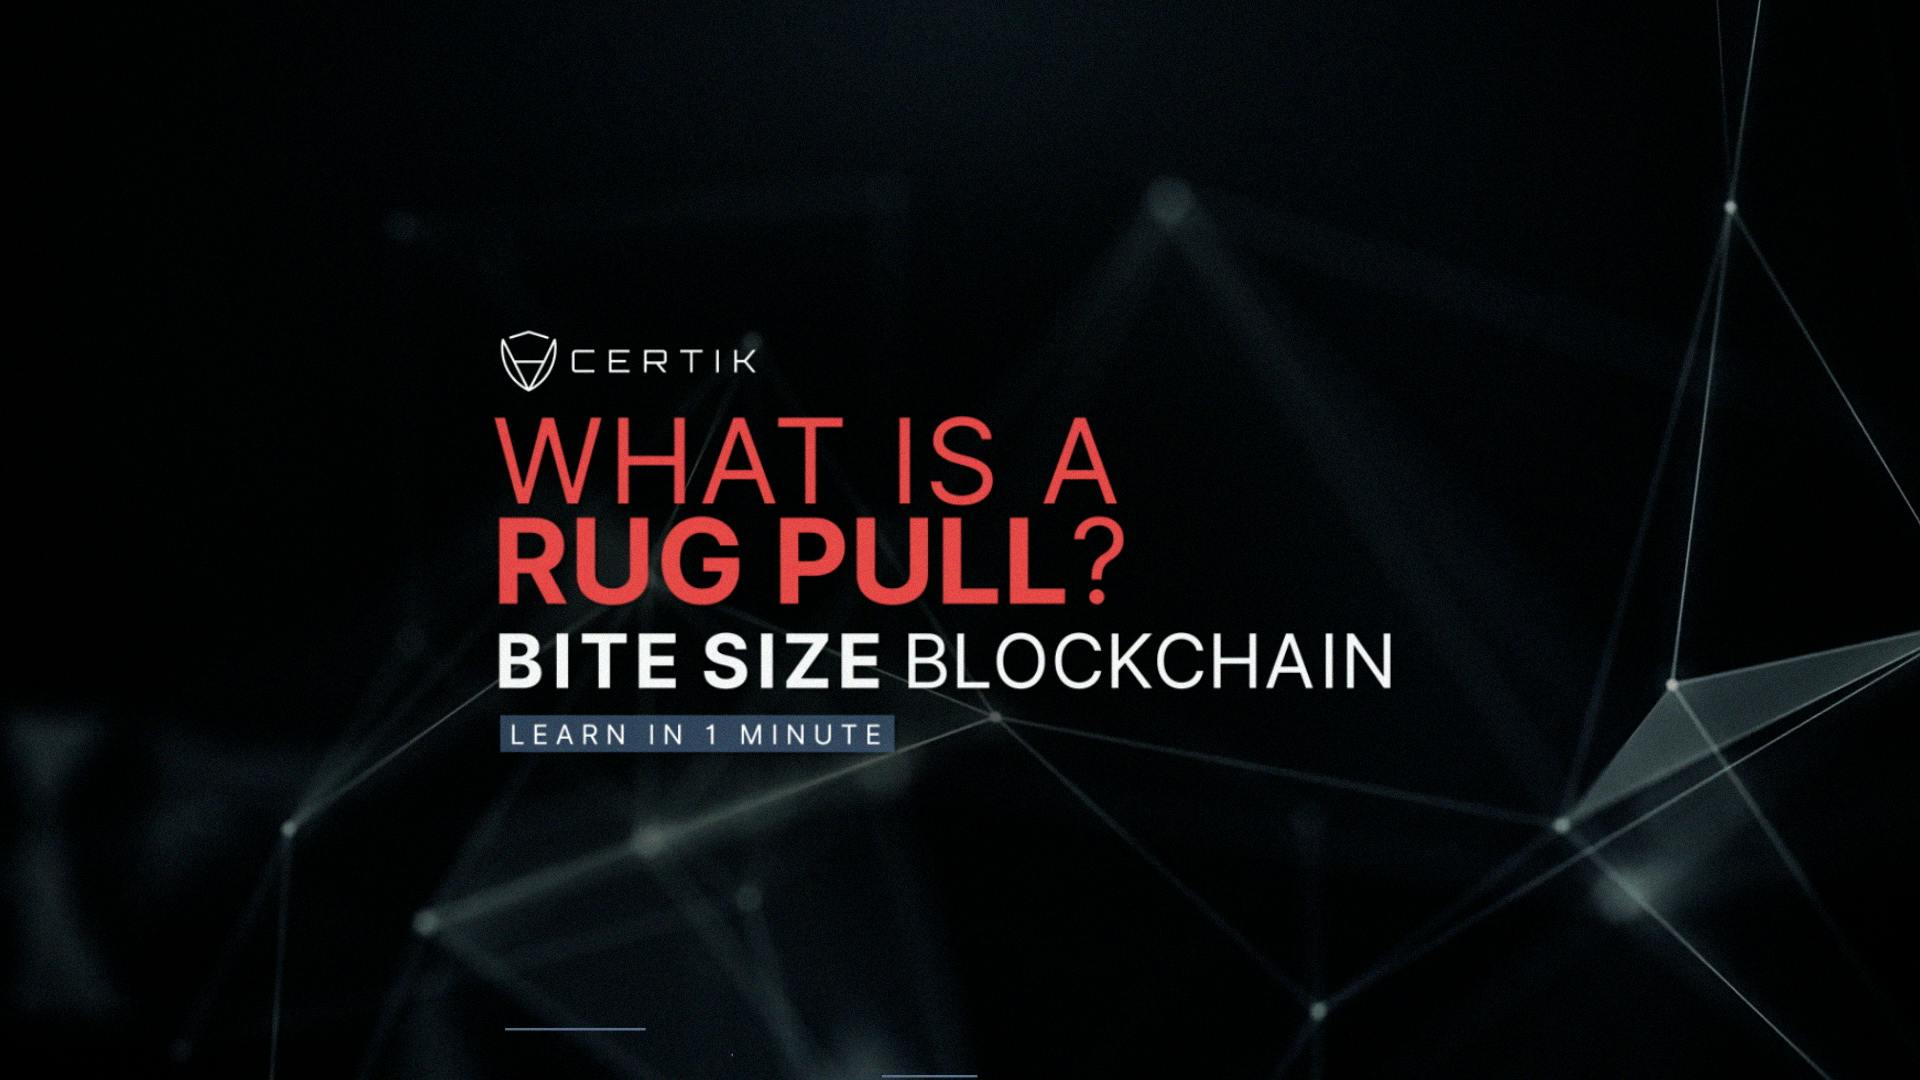 What is a Rug Pull?